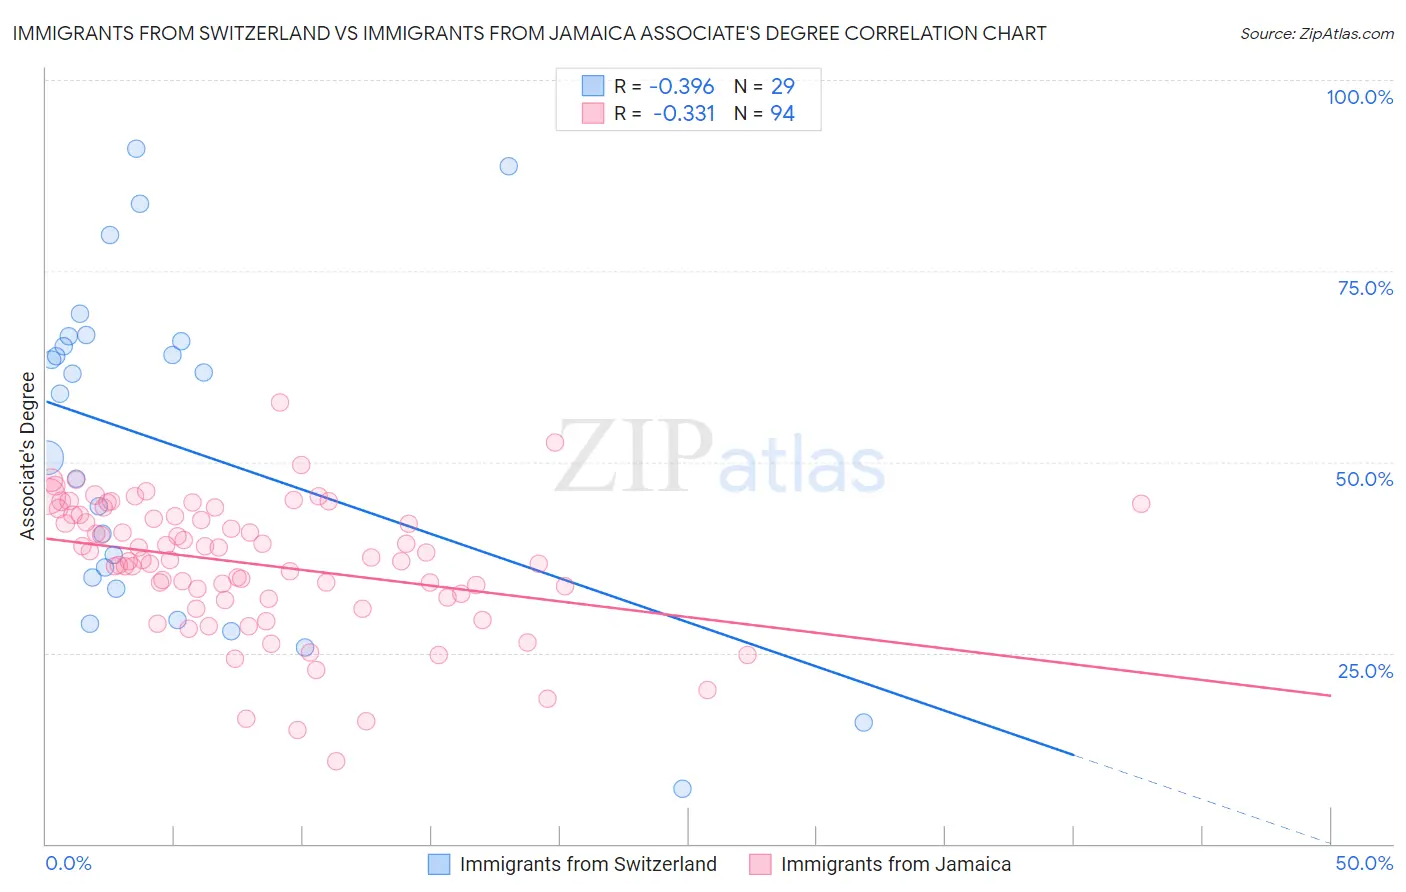 Immigrants from Switzerland vs Immigrants from Jamaica Associate's Degree